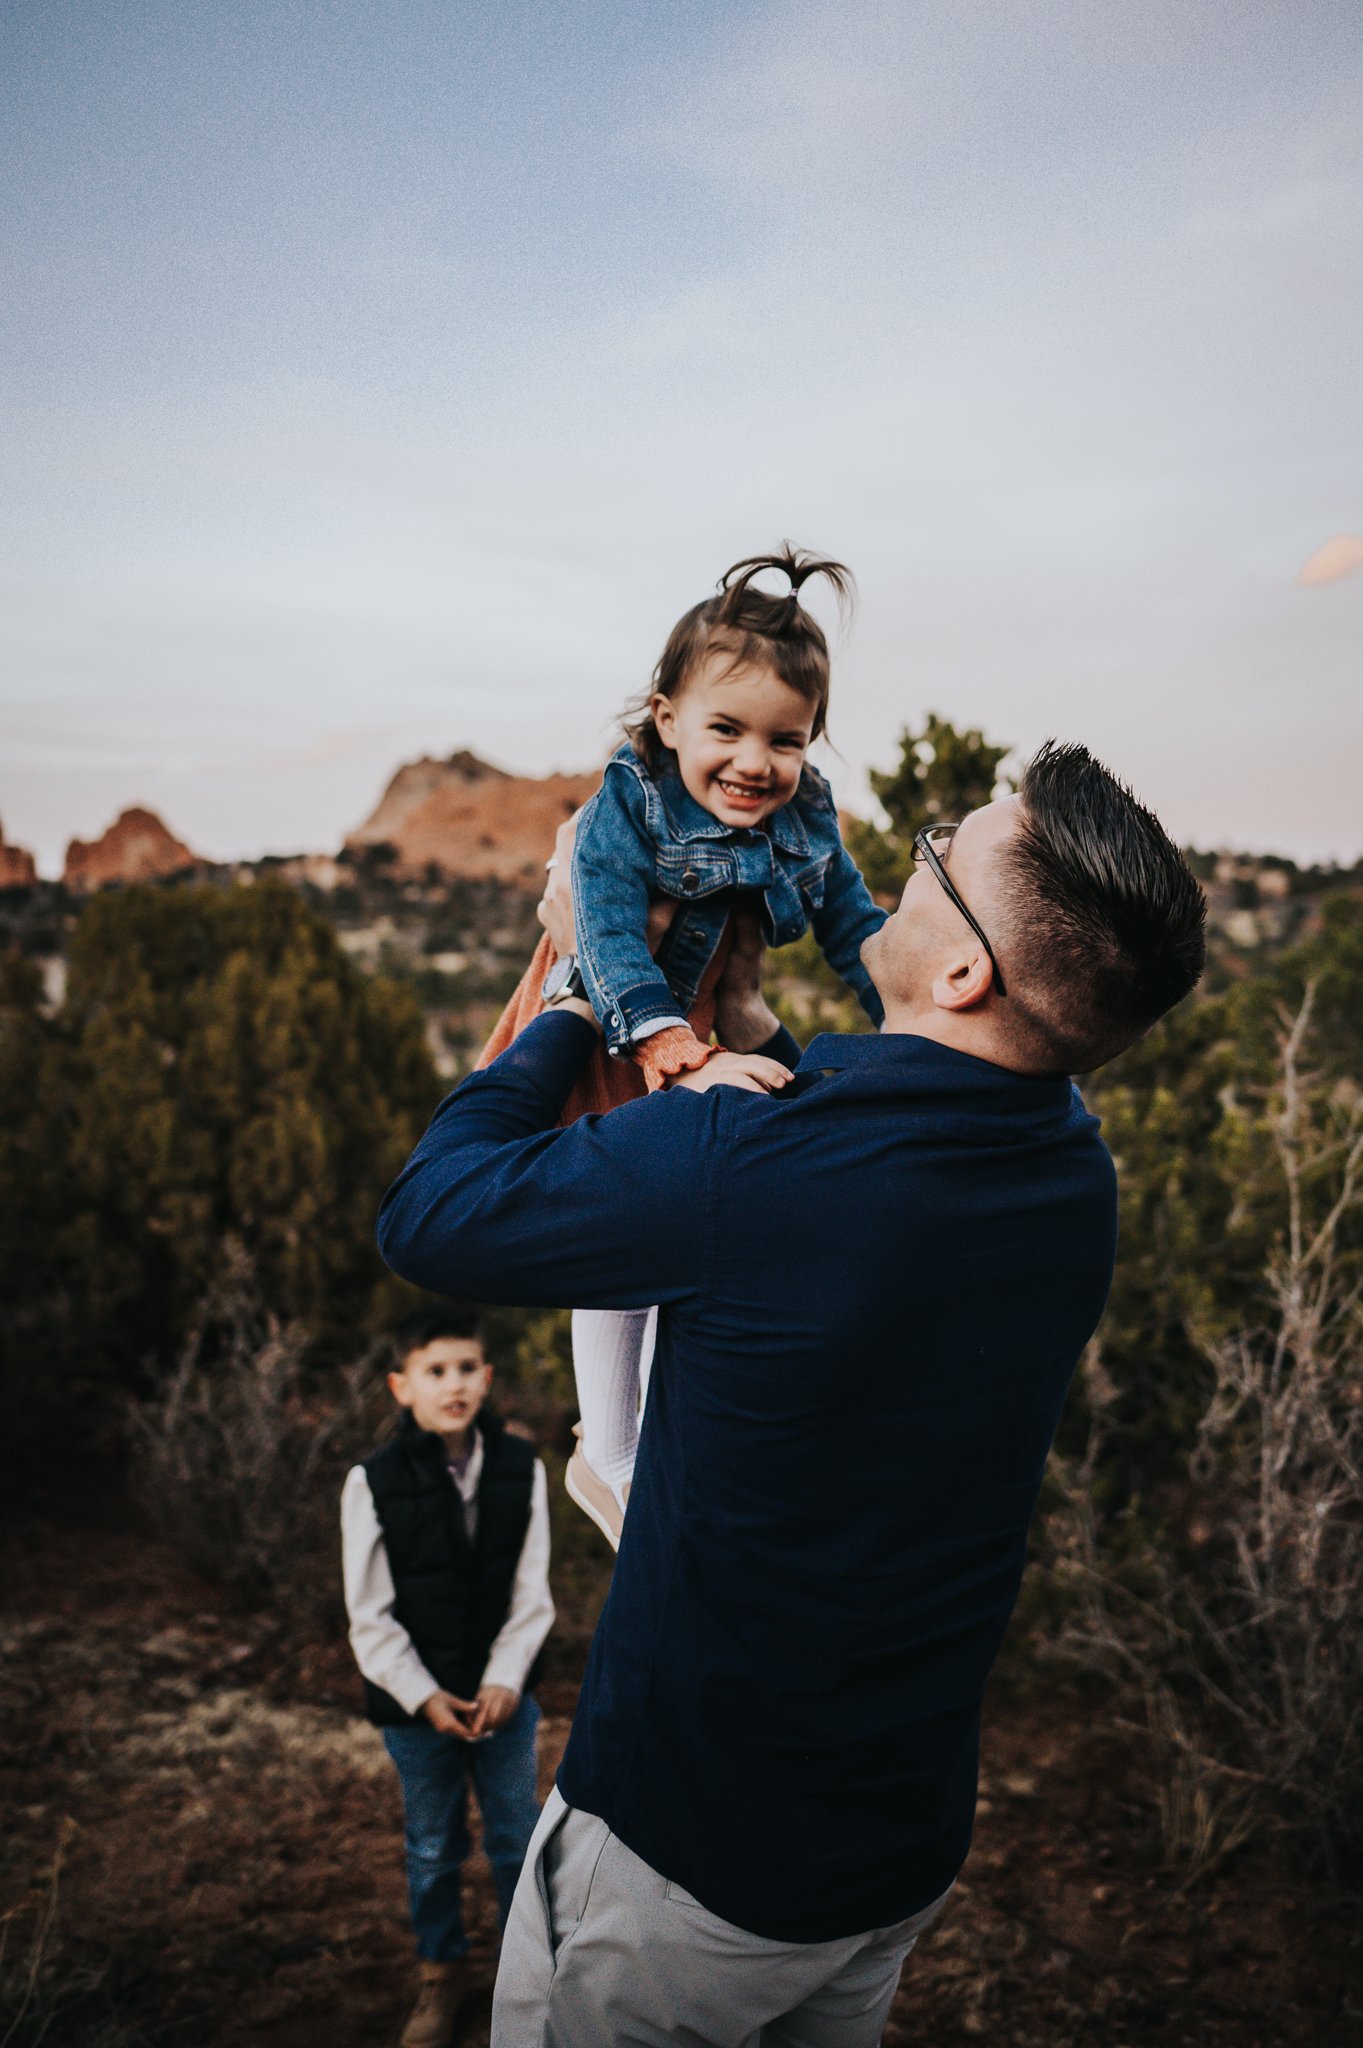 AnneMarie Jameson Family Session Colorado Springs Colorado Photographer Garden of the Gods Sunset Mountain View Husband Wife Sons Daughter Wild Prairie Photography-30-2022.jpg